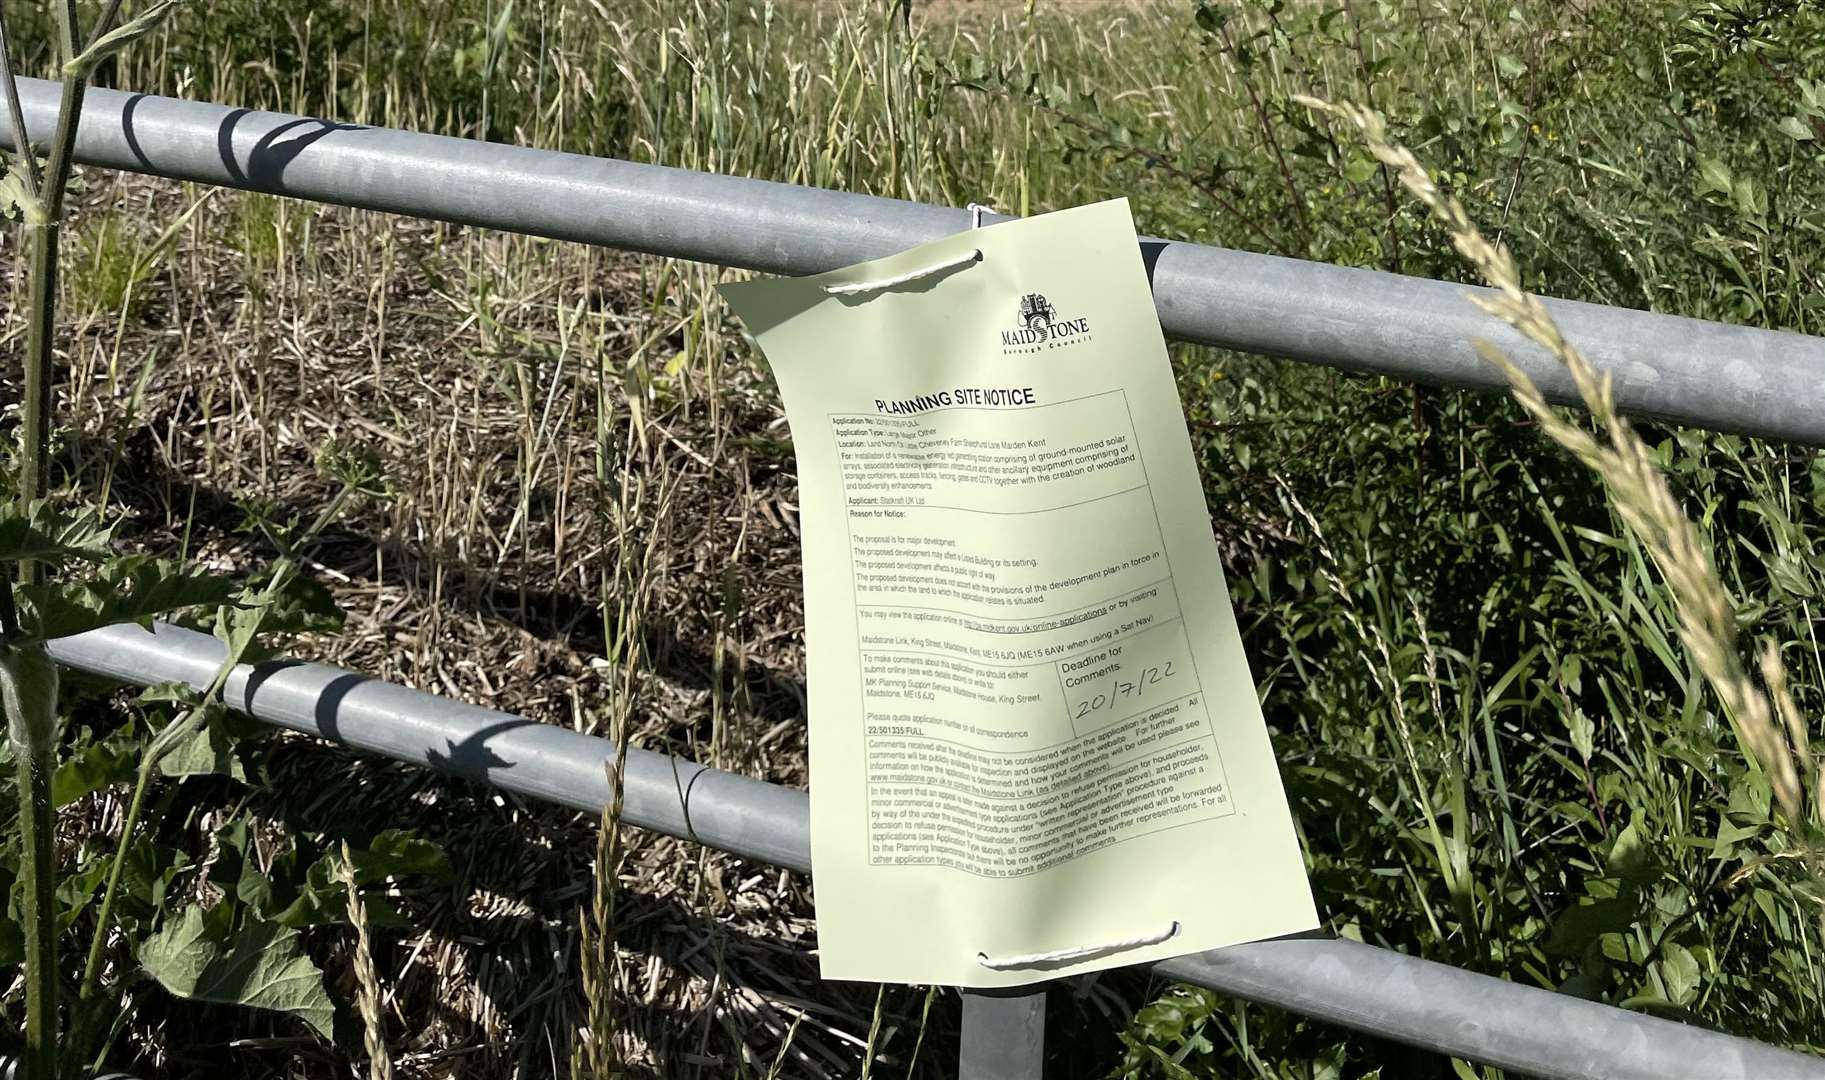 The planning application notice at the proposed site of the solar farm